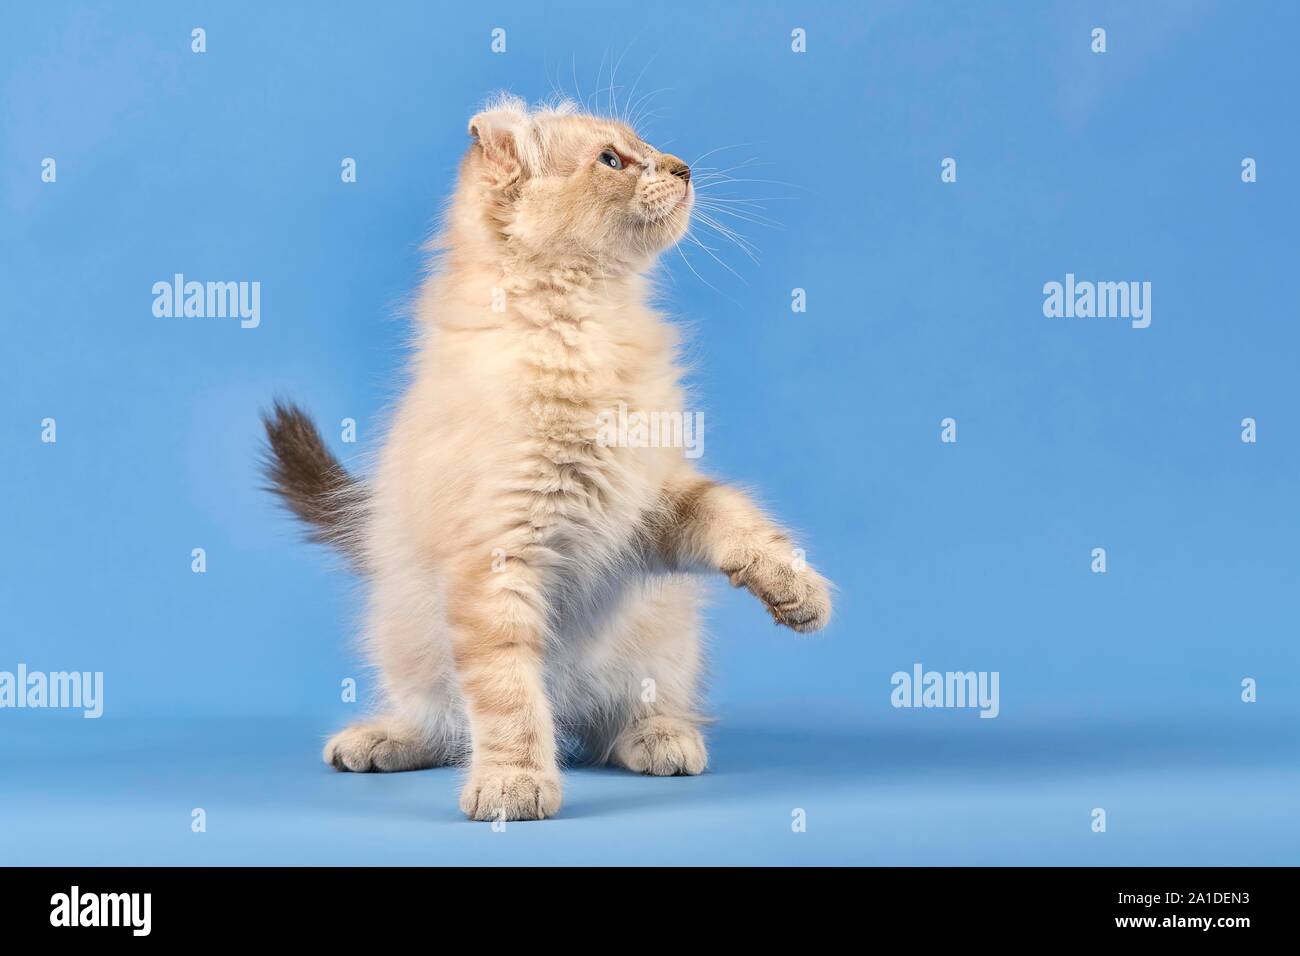 Breedcat American Curl (Felis silvestris catus), standing, lifts paw, blue tabby point, young, 10 weeks, blue background, Austria Stock Photo